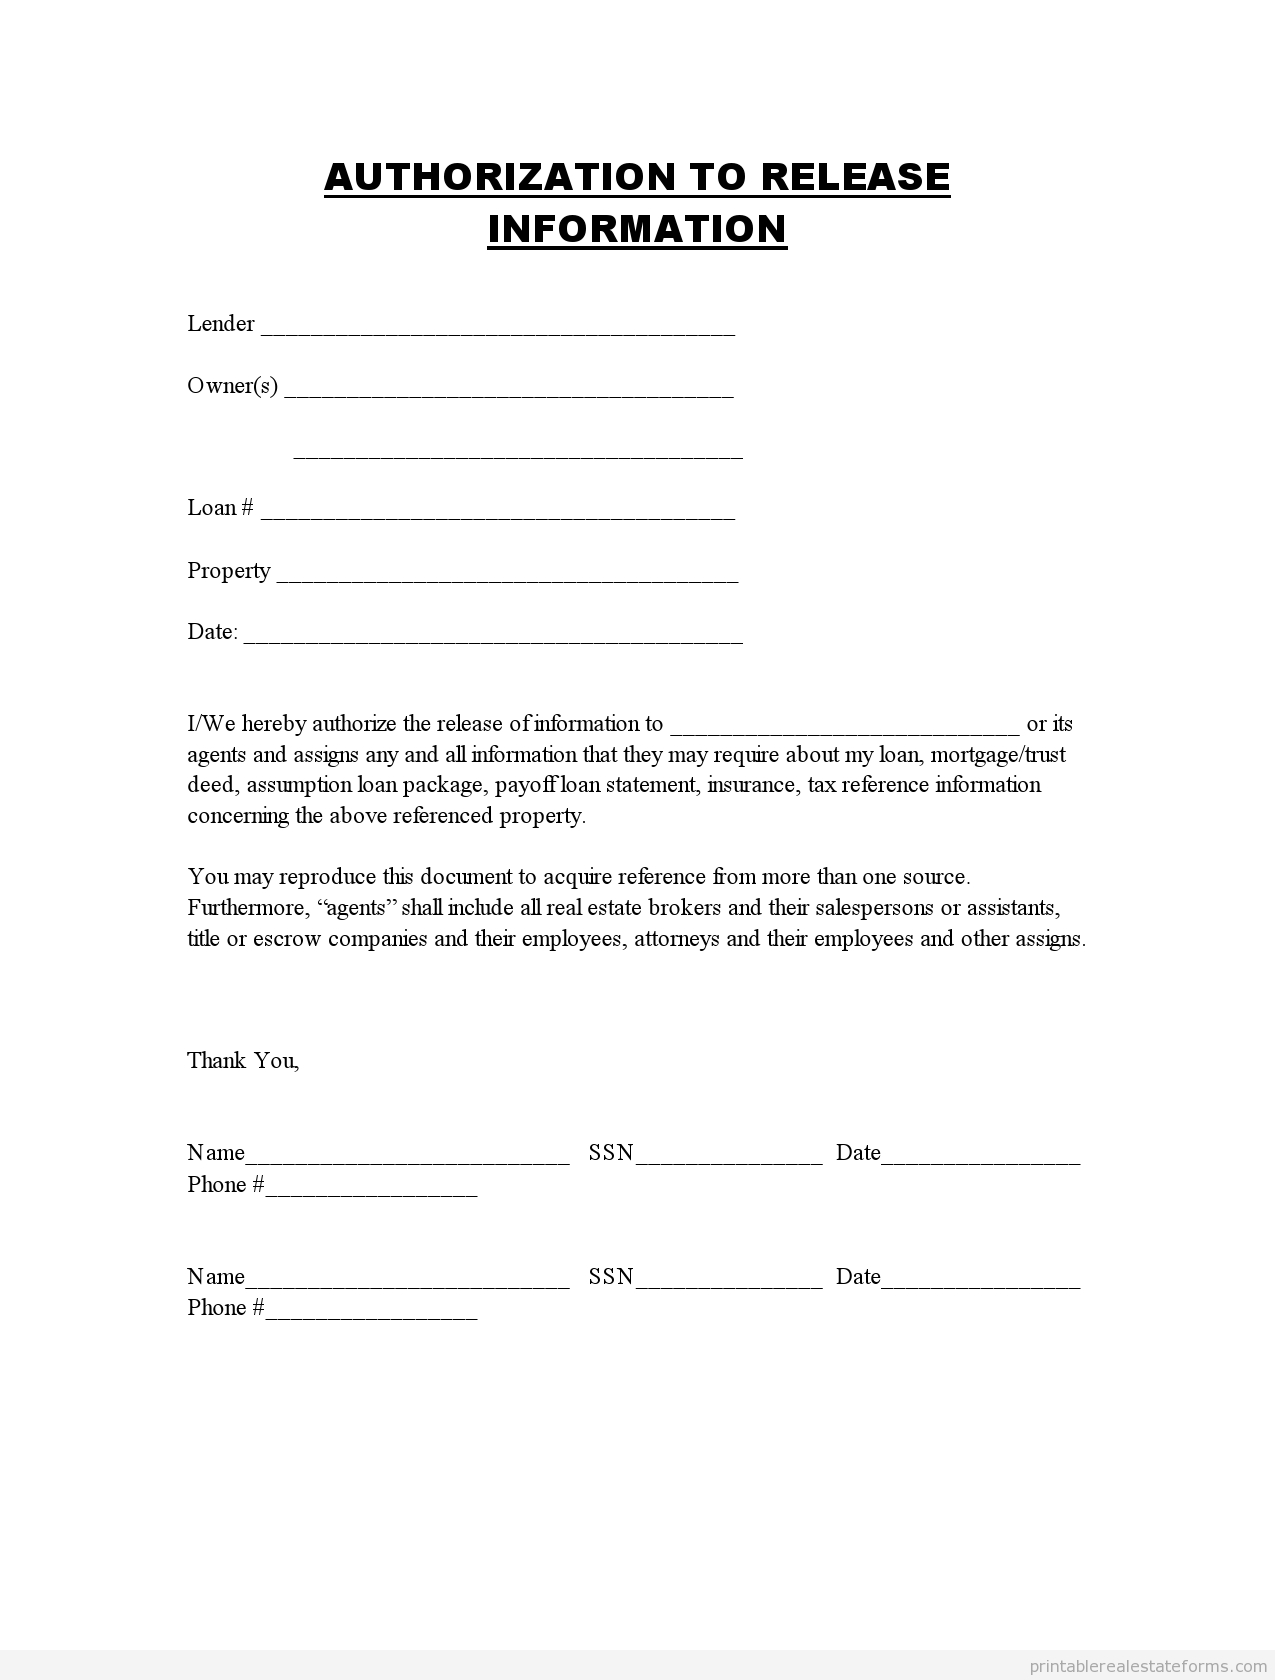 Printable Authorization To Release Information Template 2015 - Free Printable Photo Release Form